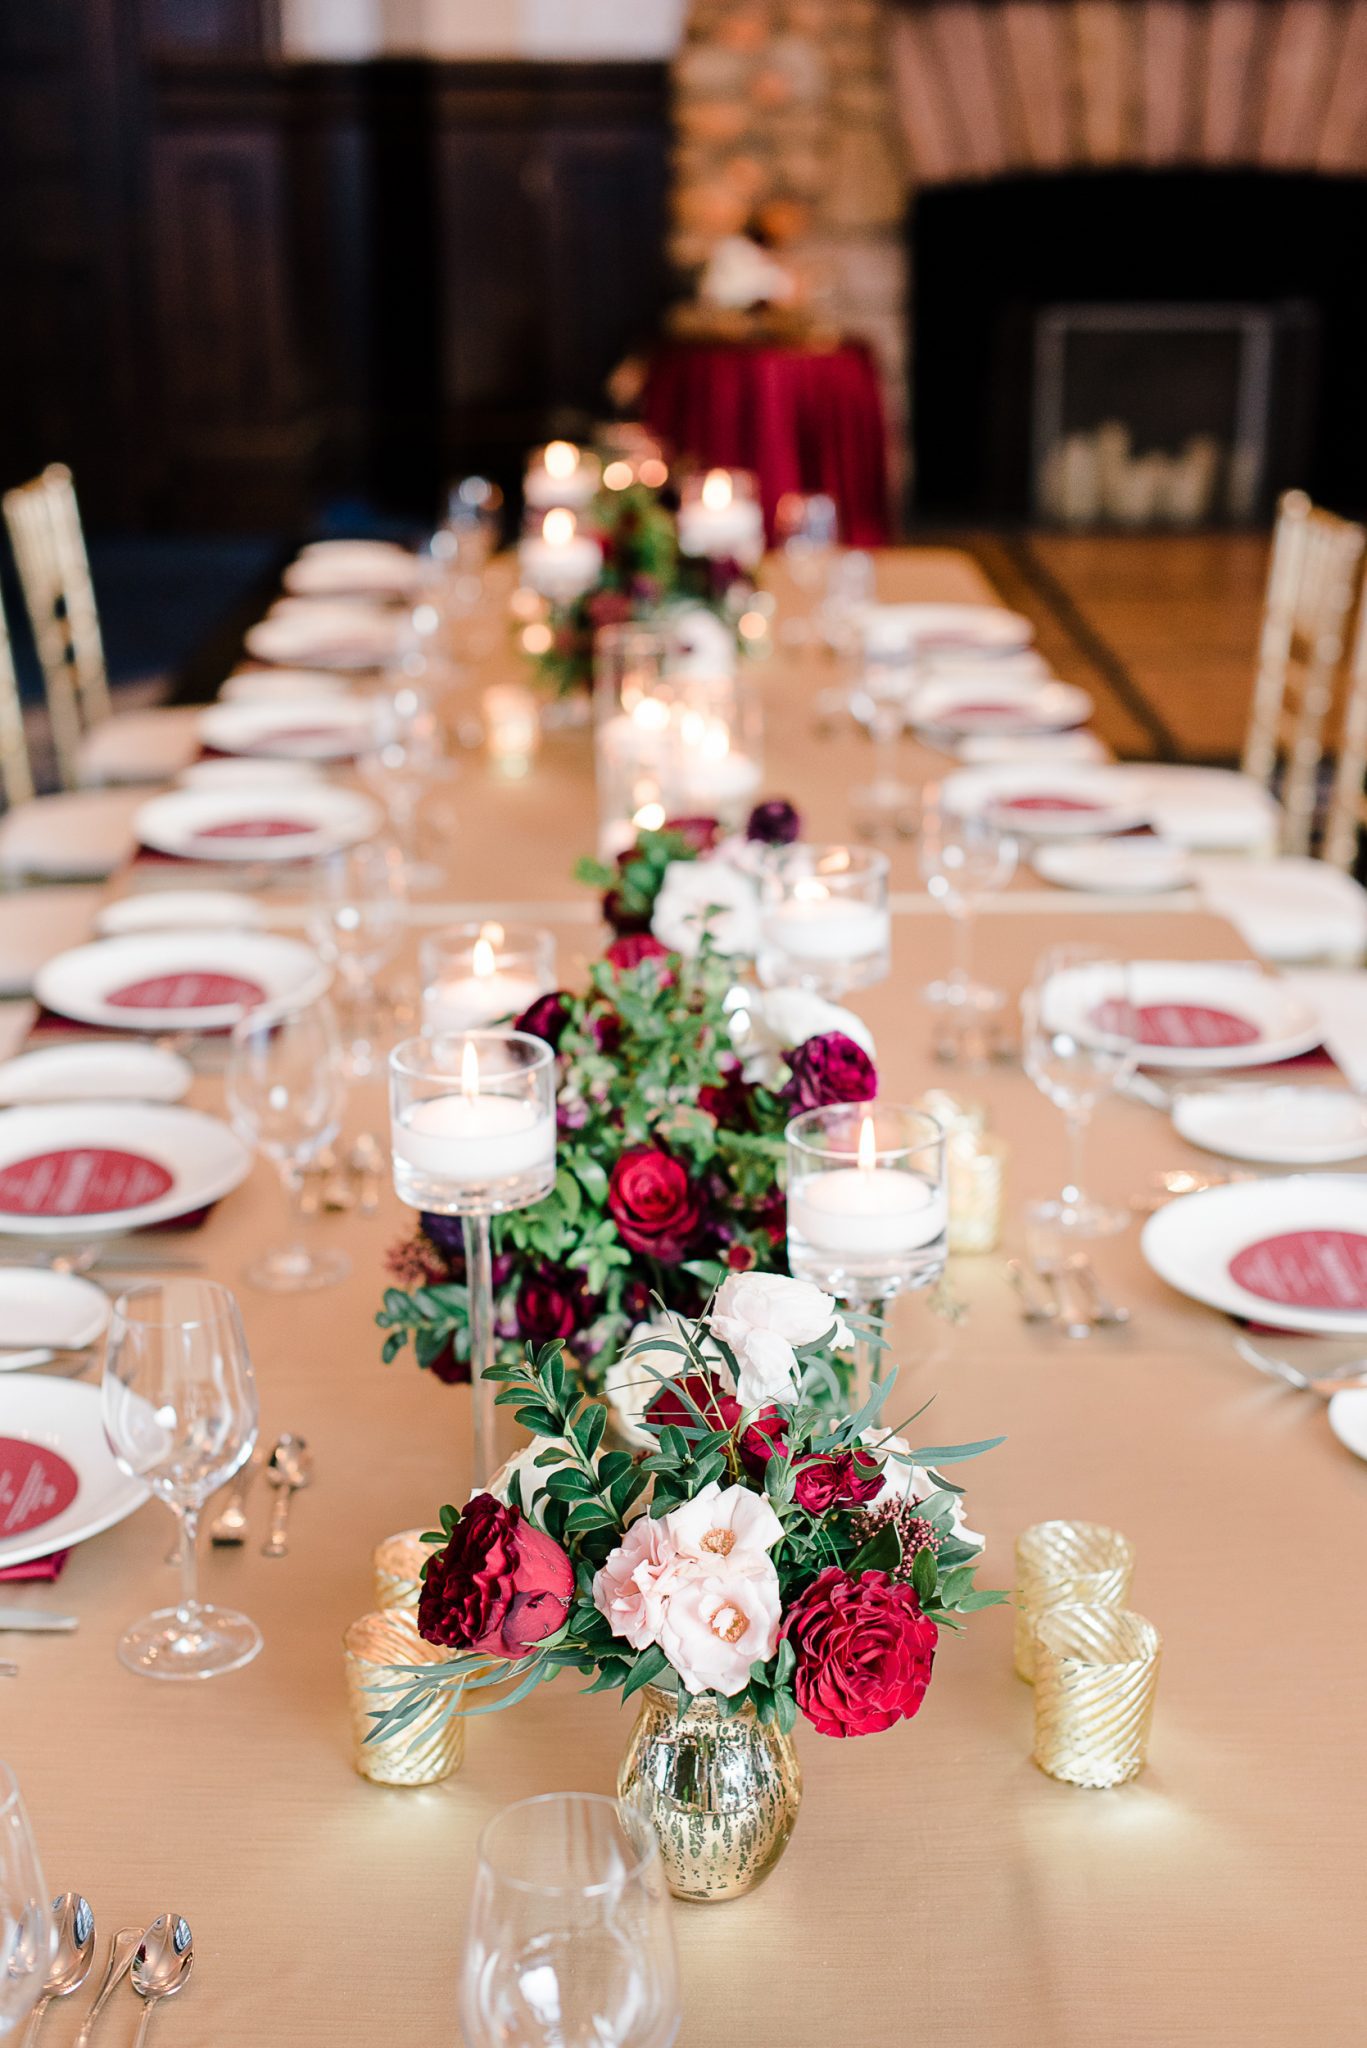 Be My Valentine: A Romantic Valentine's Day Wedding at Chateau Lake Louise - featured on the Bronte Bride Blog